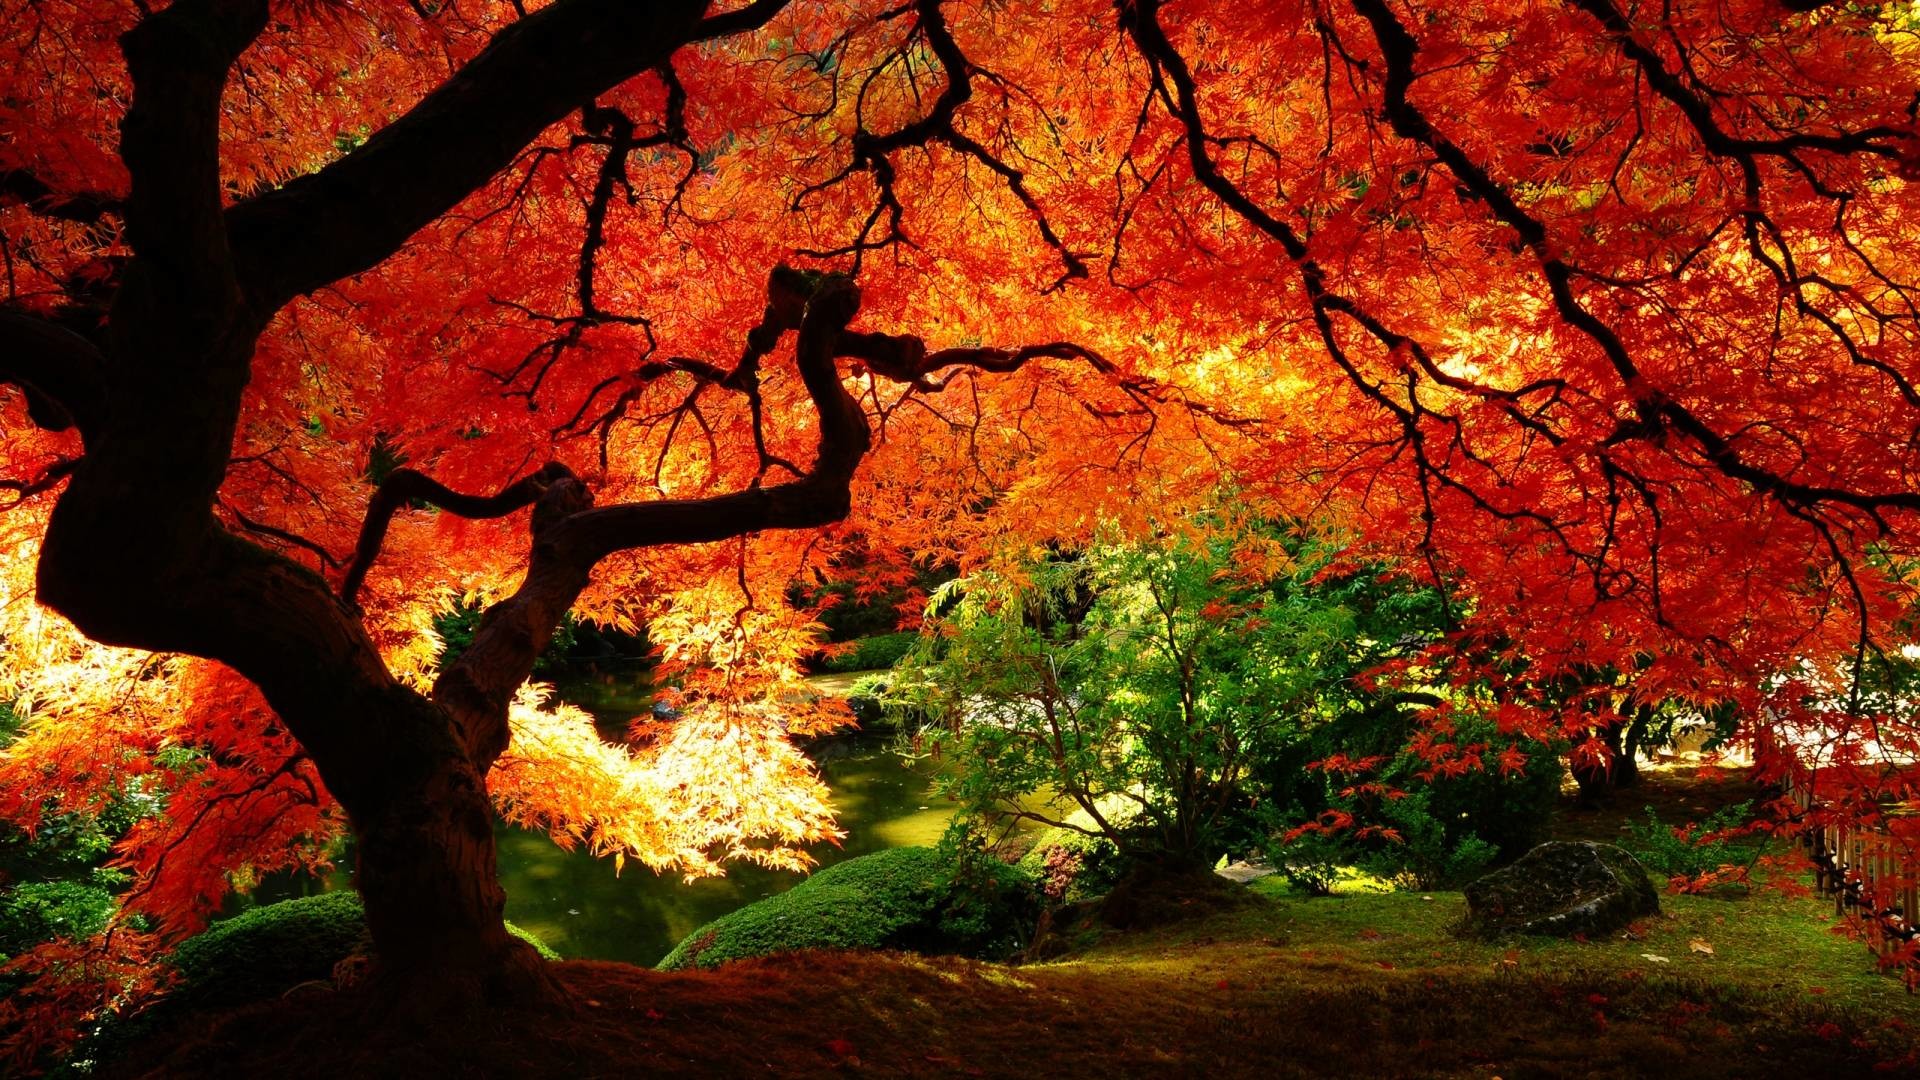 1920x1080 Explore Autumn Trees, Autumn Leaves, and more!